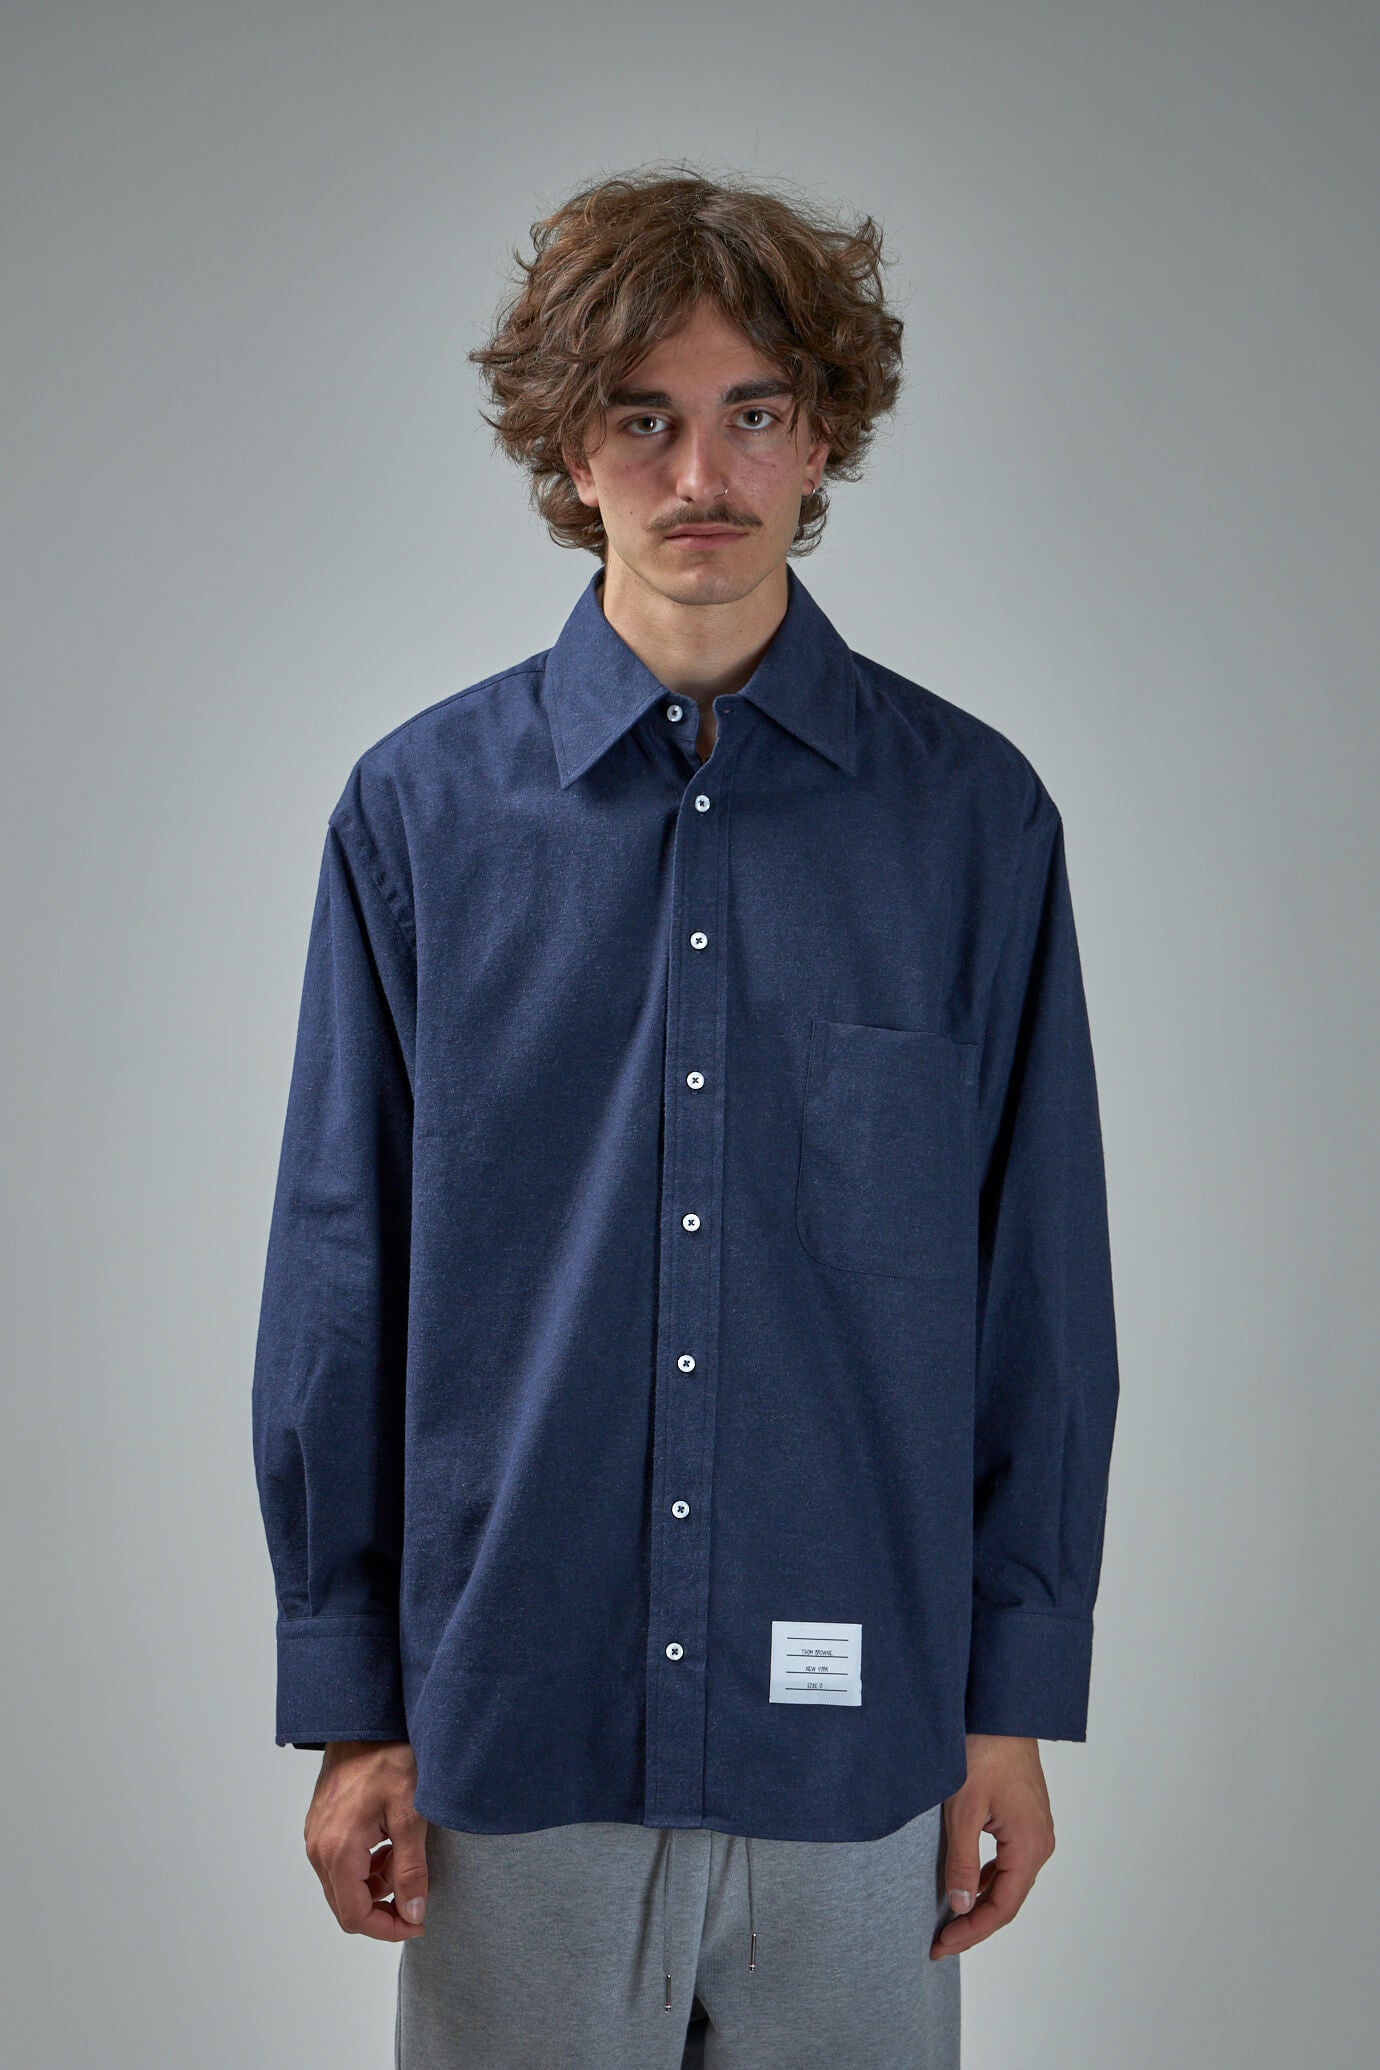 Thom Browne Oversized LS Shirt navy – LABELS